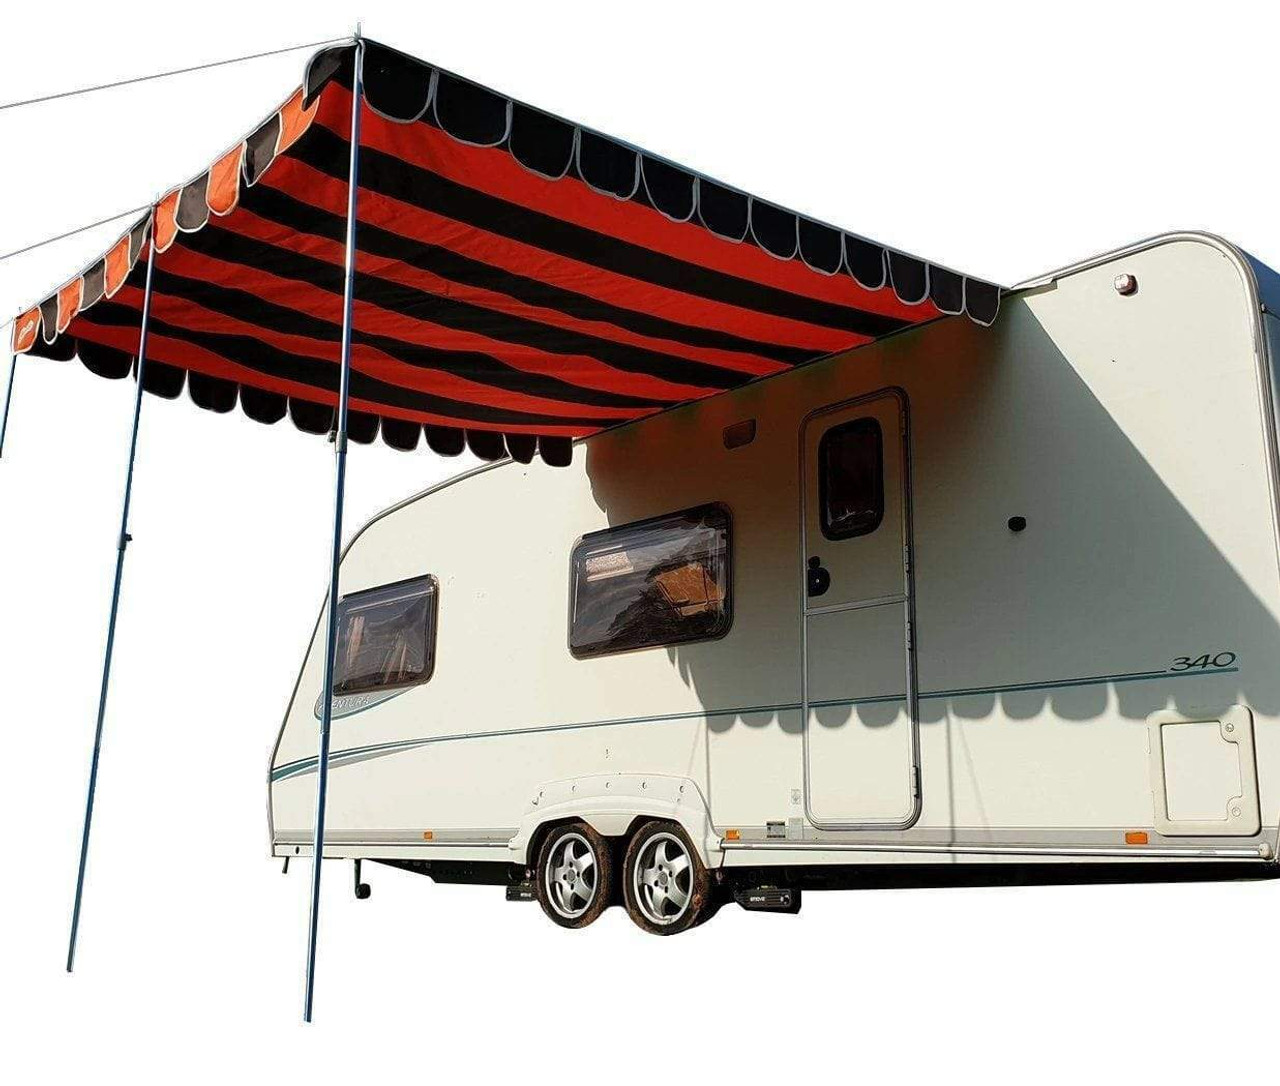 https://cdn11.bigcommerce.com/s-8hl787wvsy/images/stencil/1280x1280/products/2935/12605/orange-and-brown-caravan-sun-canopy-shade-olpro__22099.1687423278.jpg?c=1